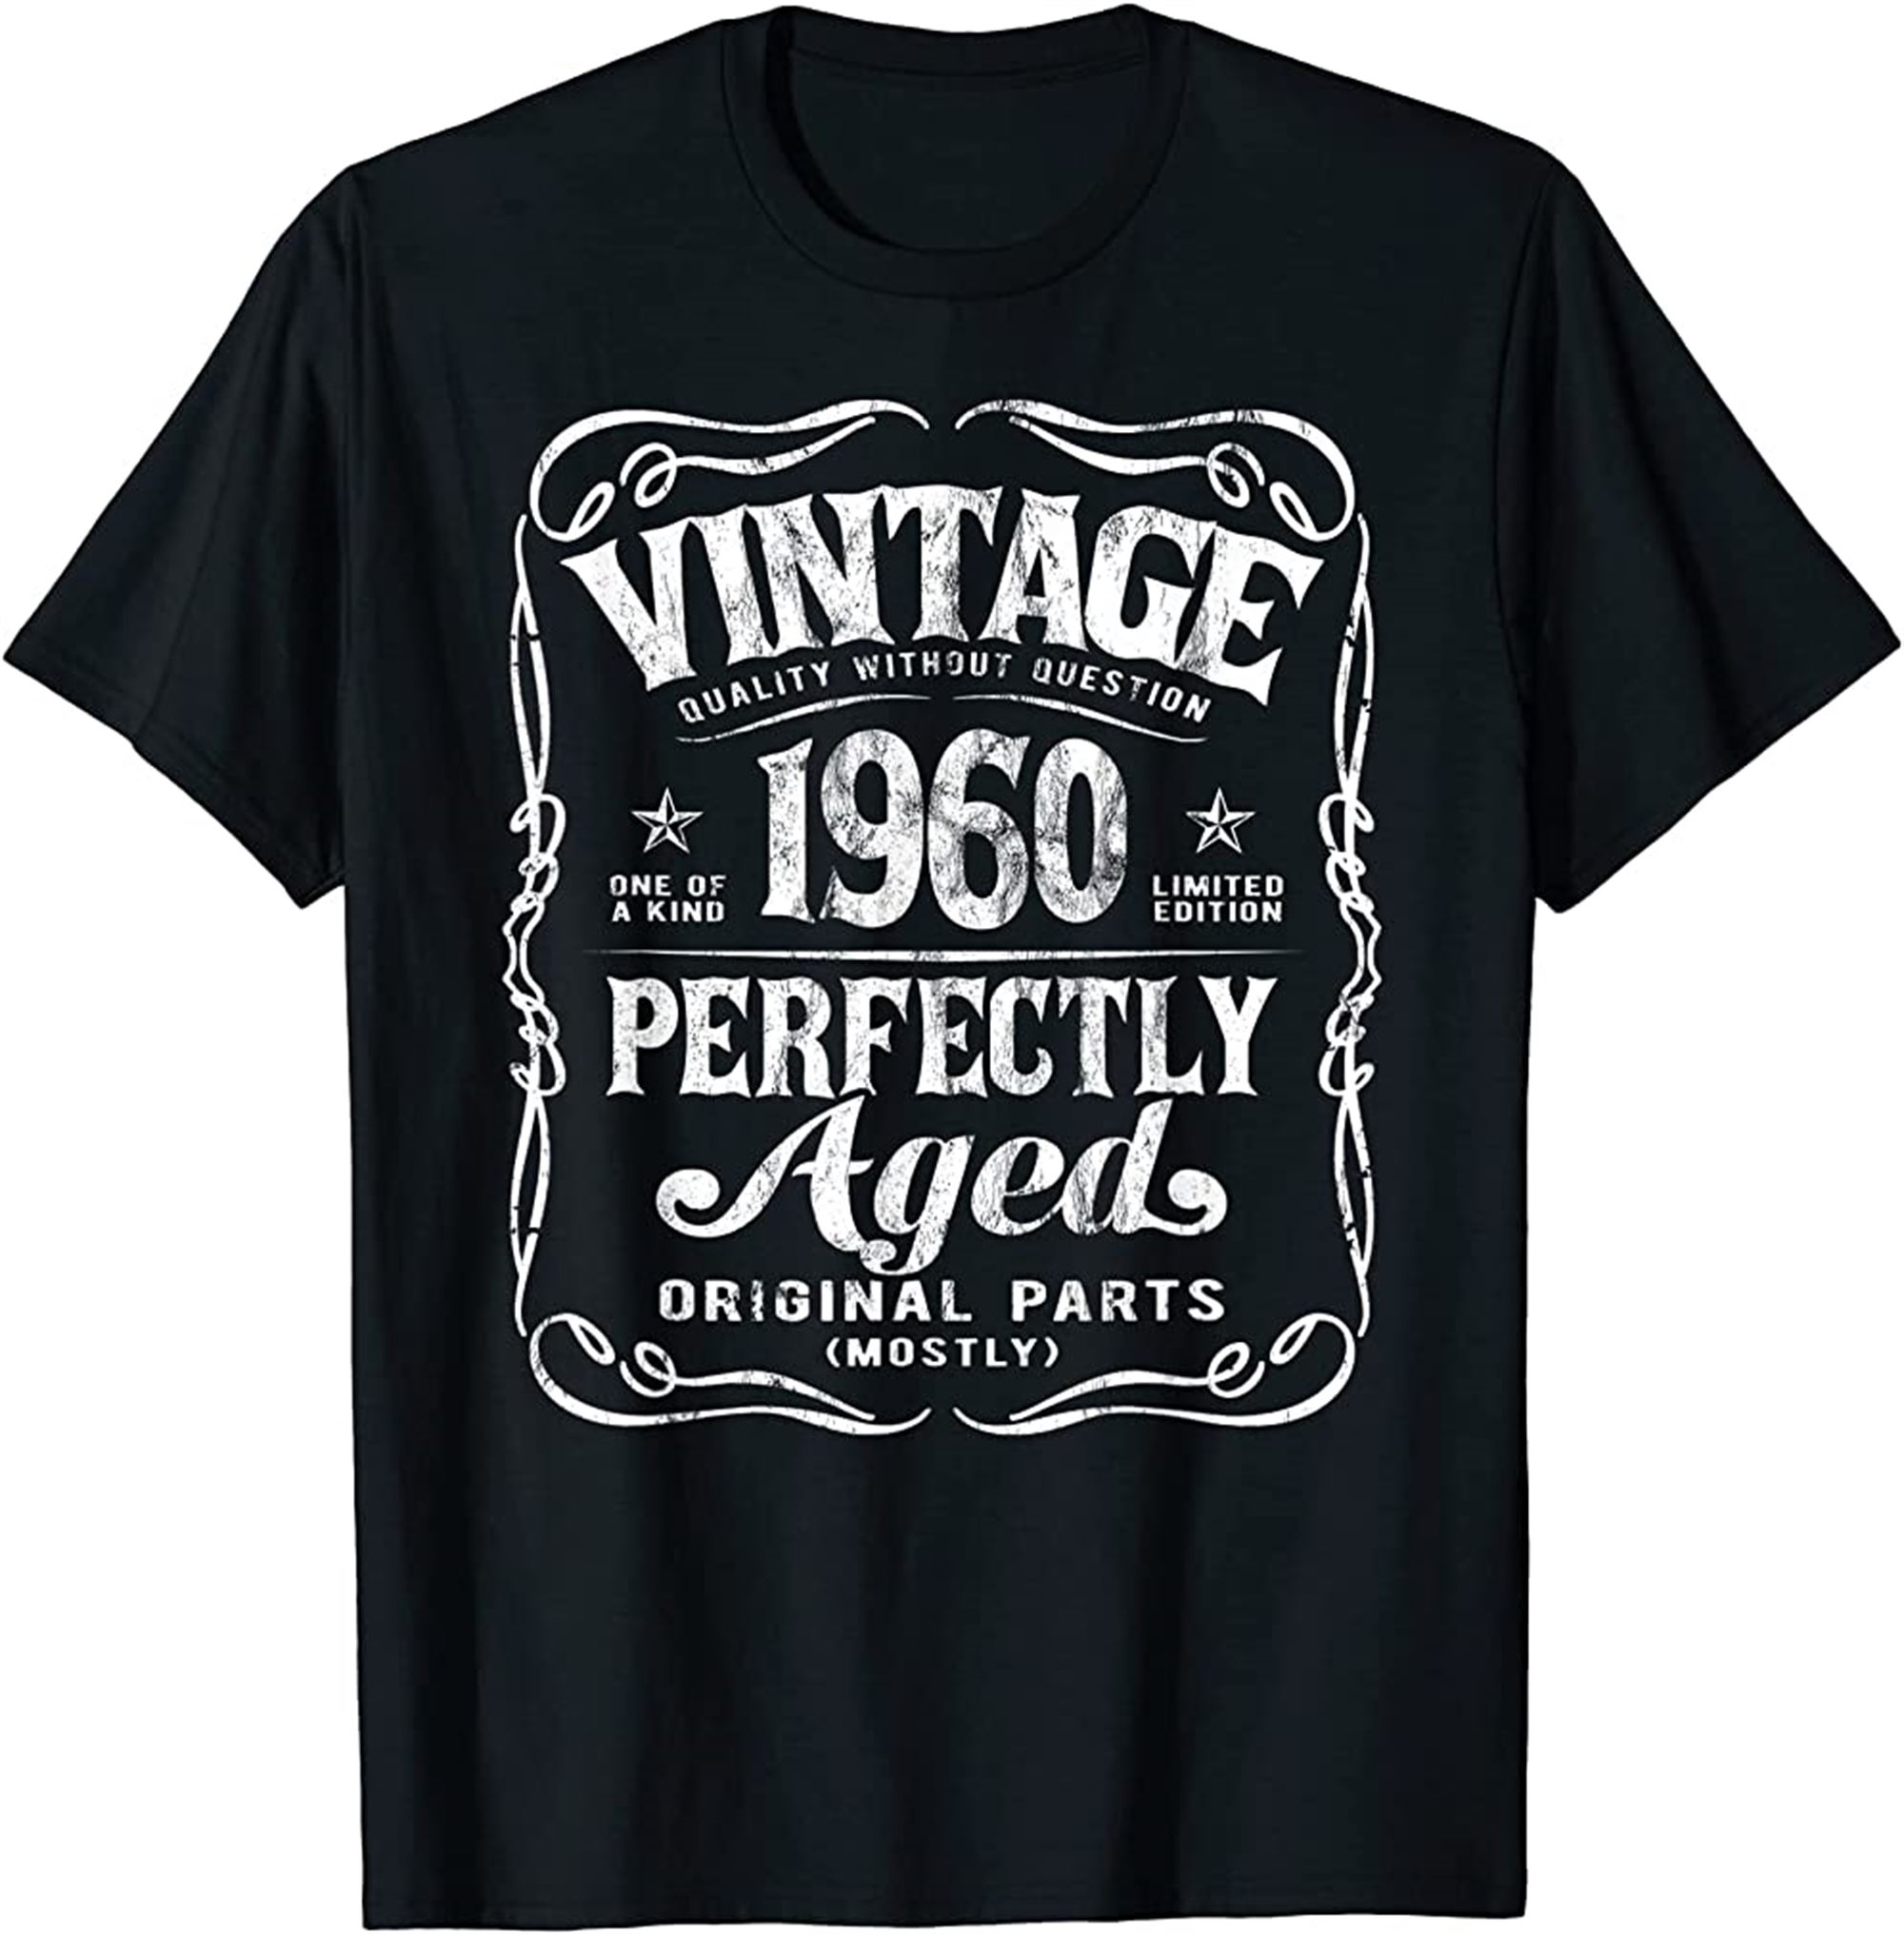 Vintage Made In 1960 Classic Birthday T-shirt Full Size Up To 5xl